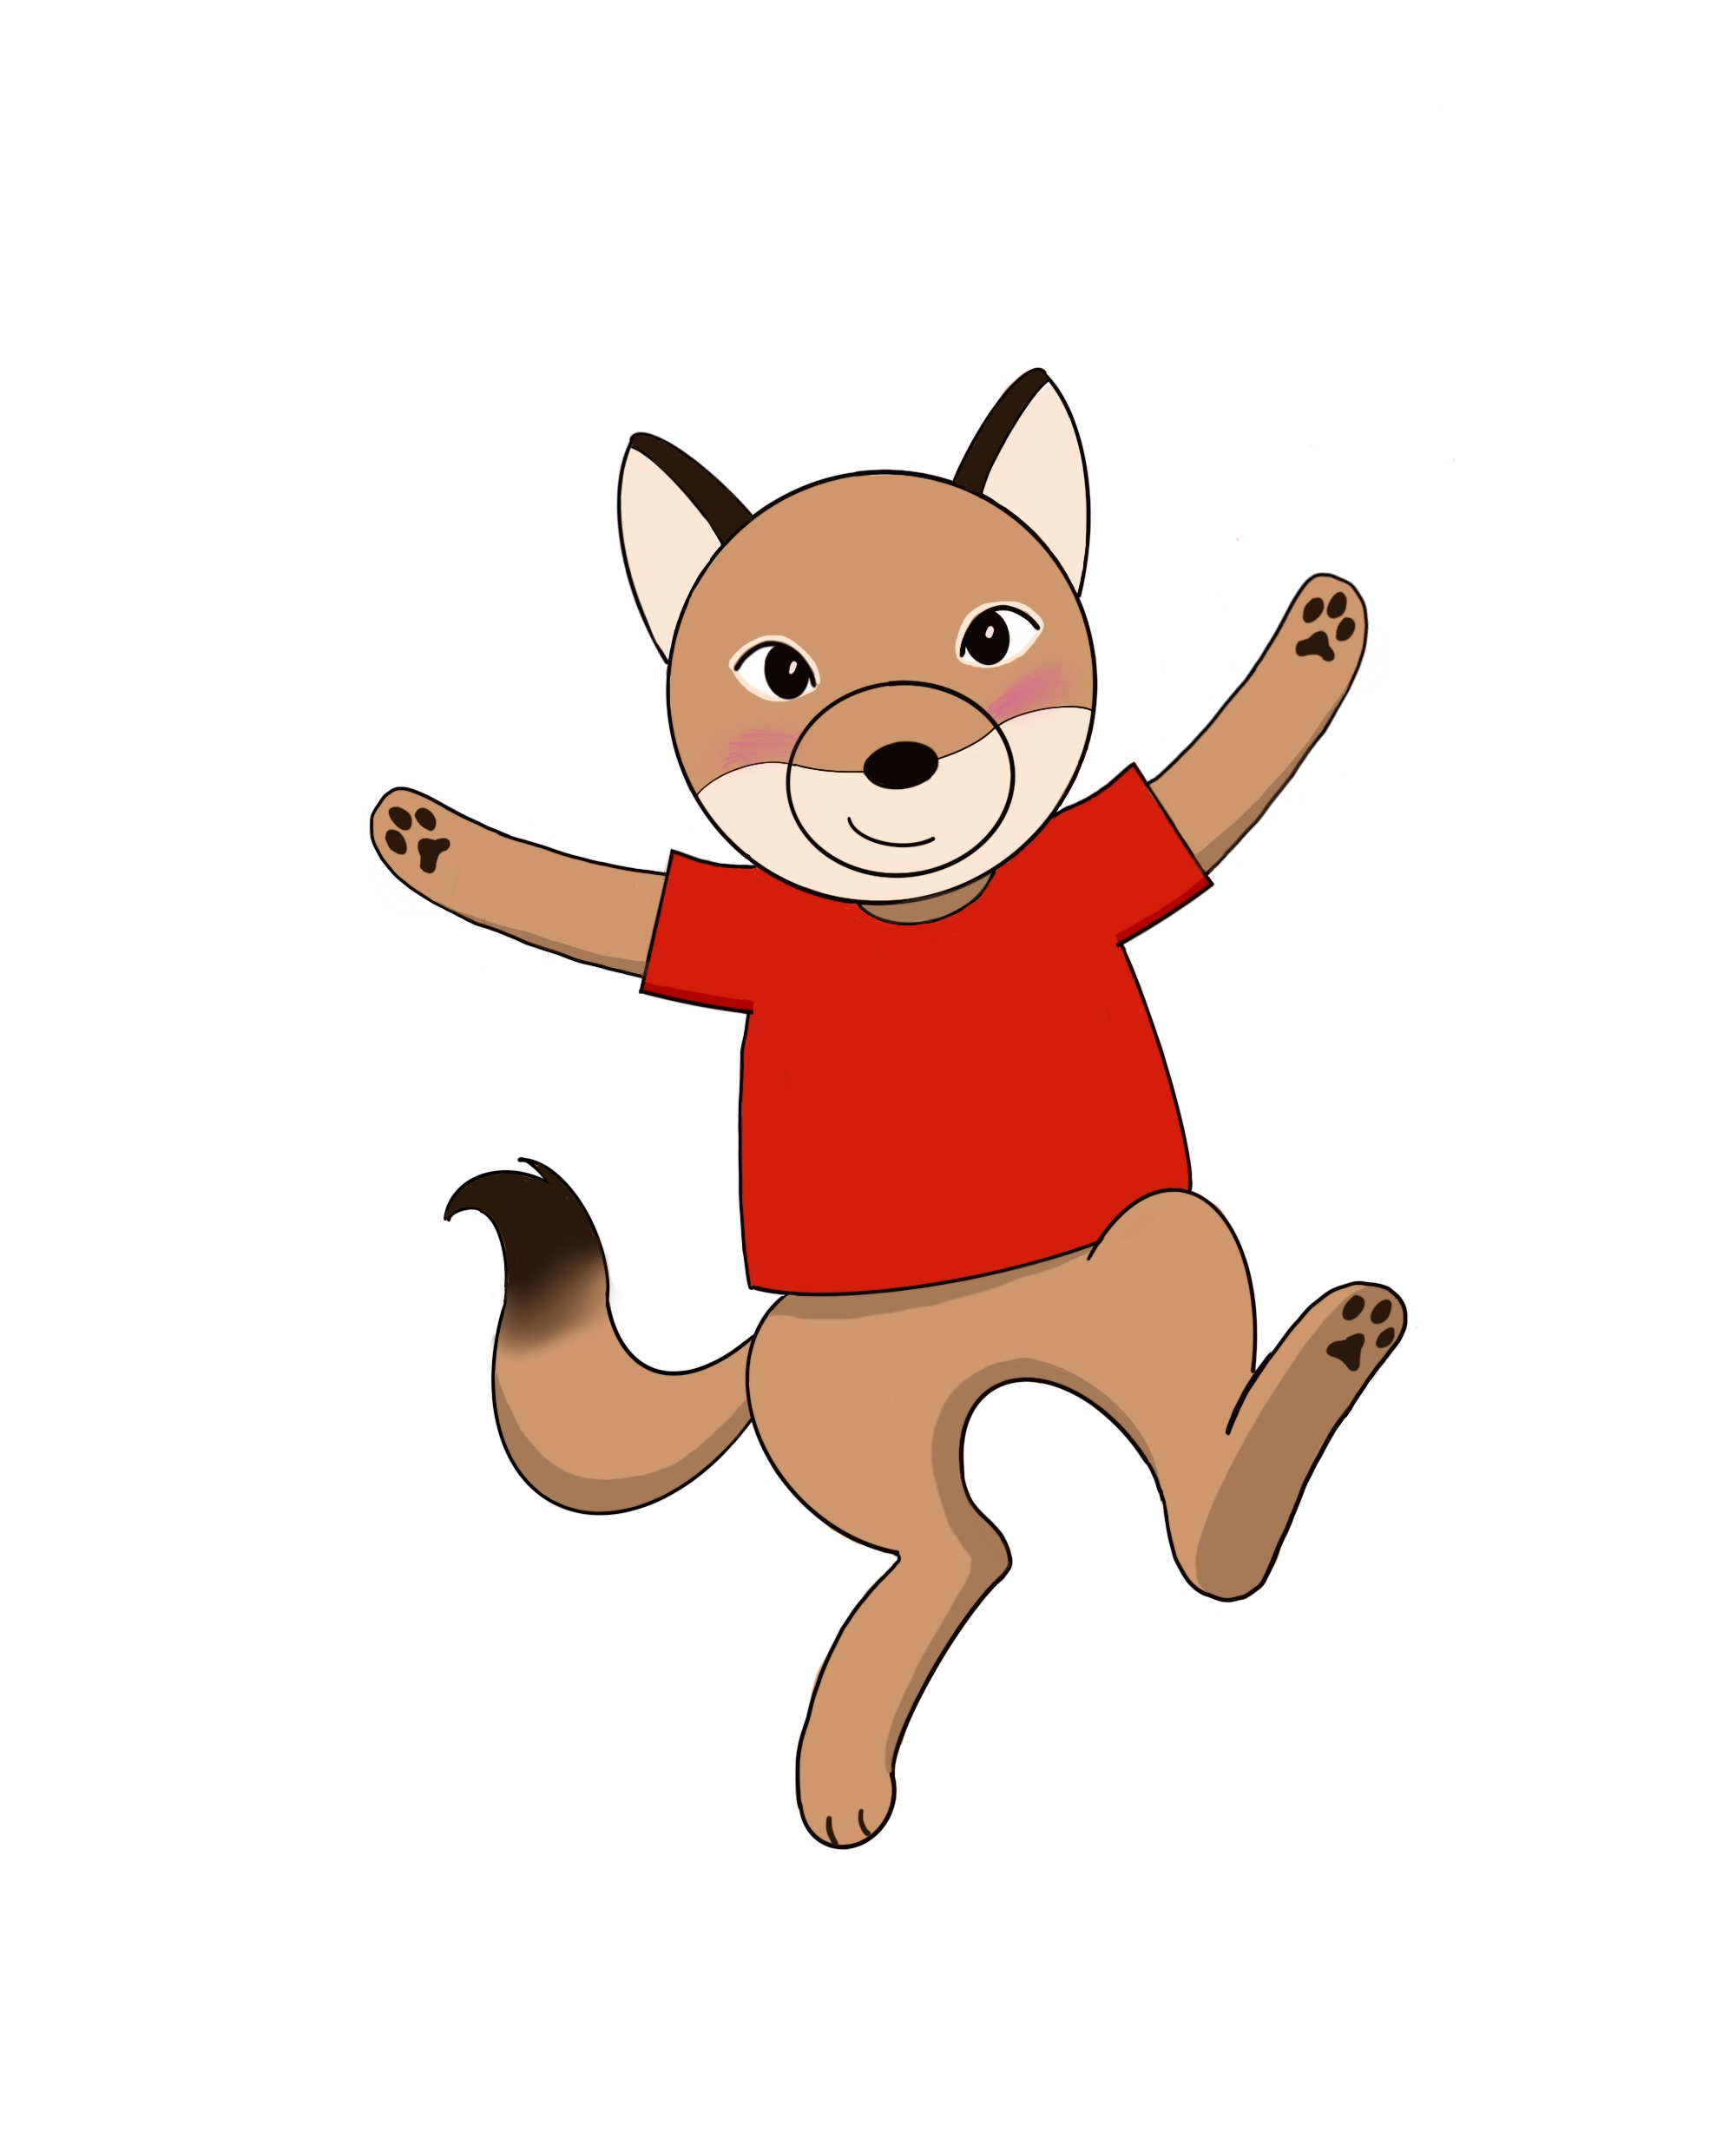 Odi the coyote, in red t-shirt